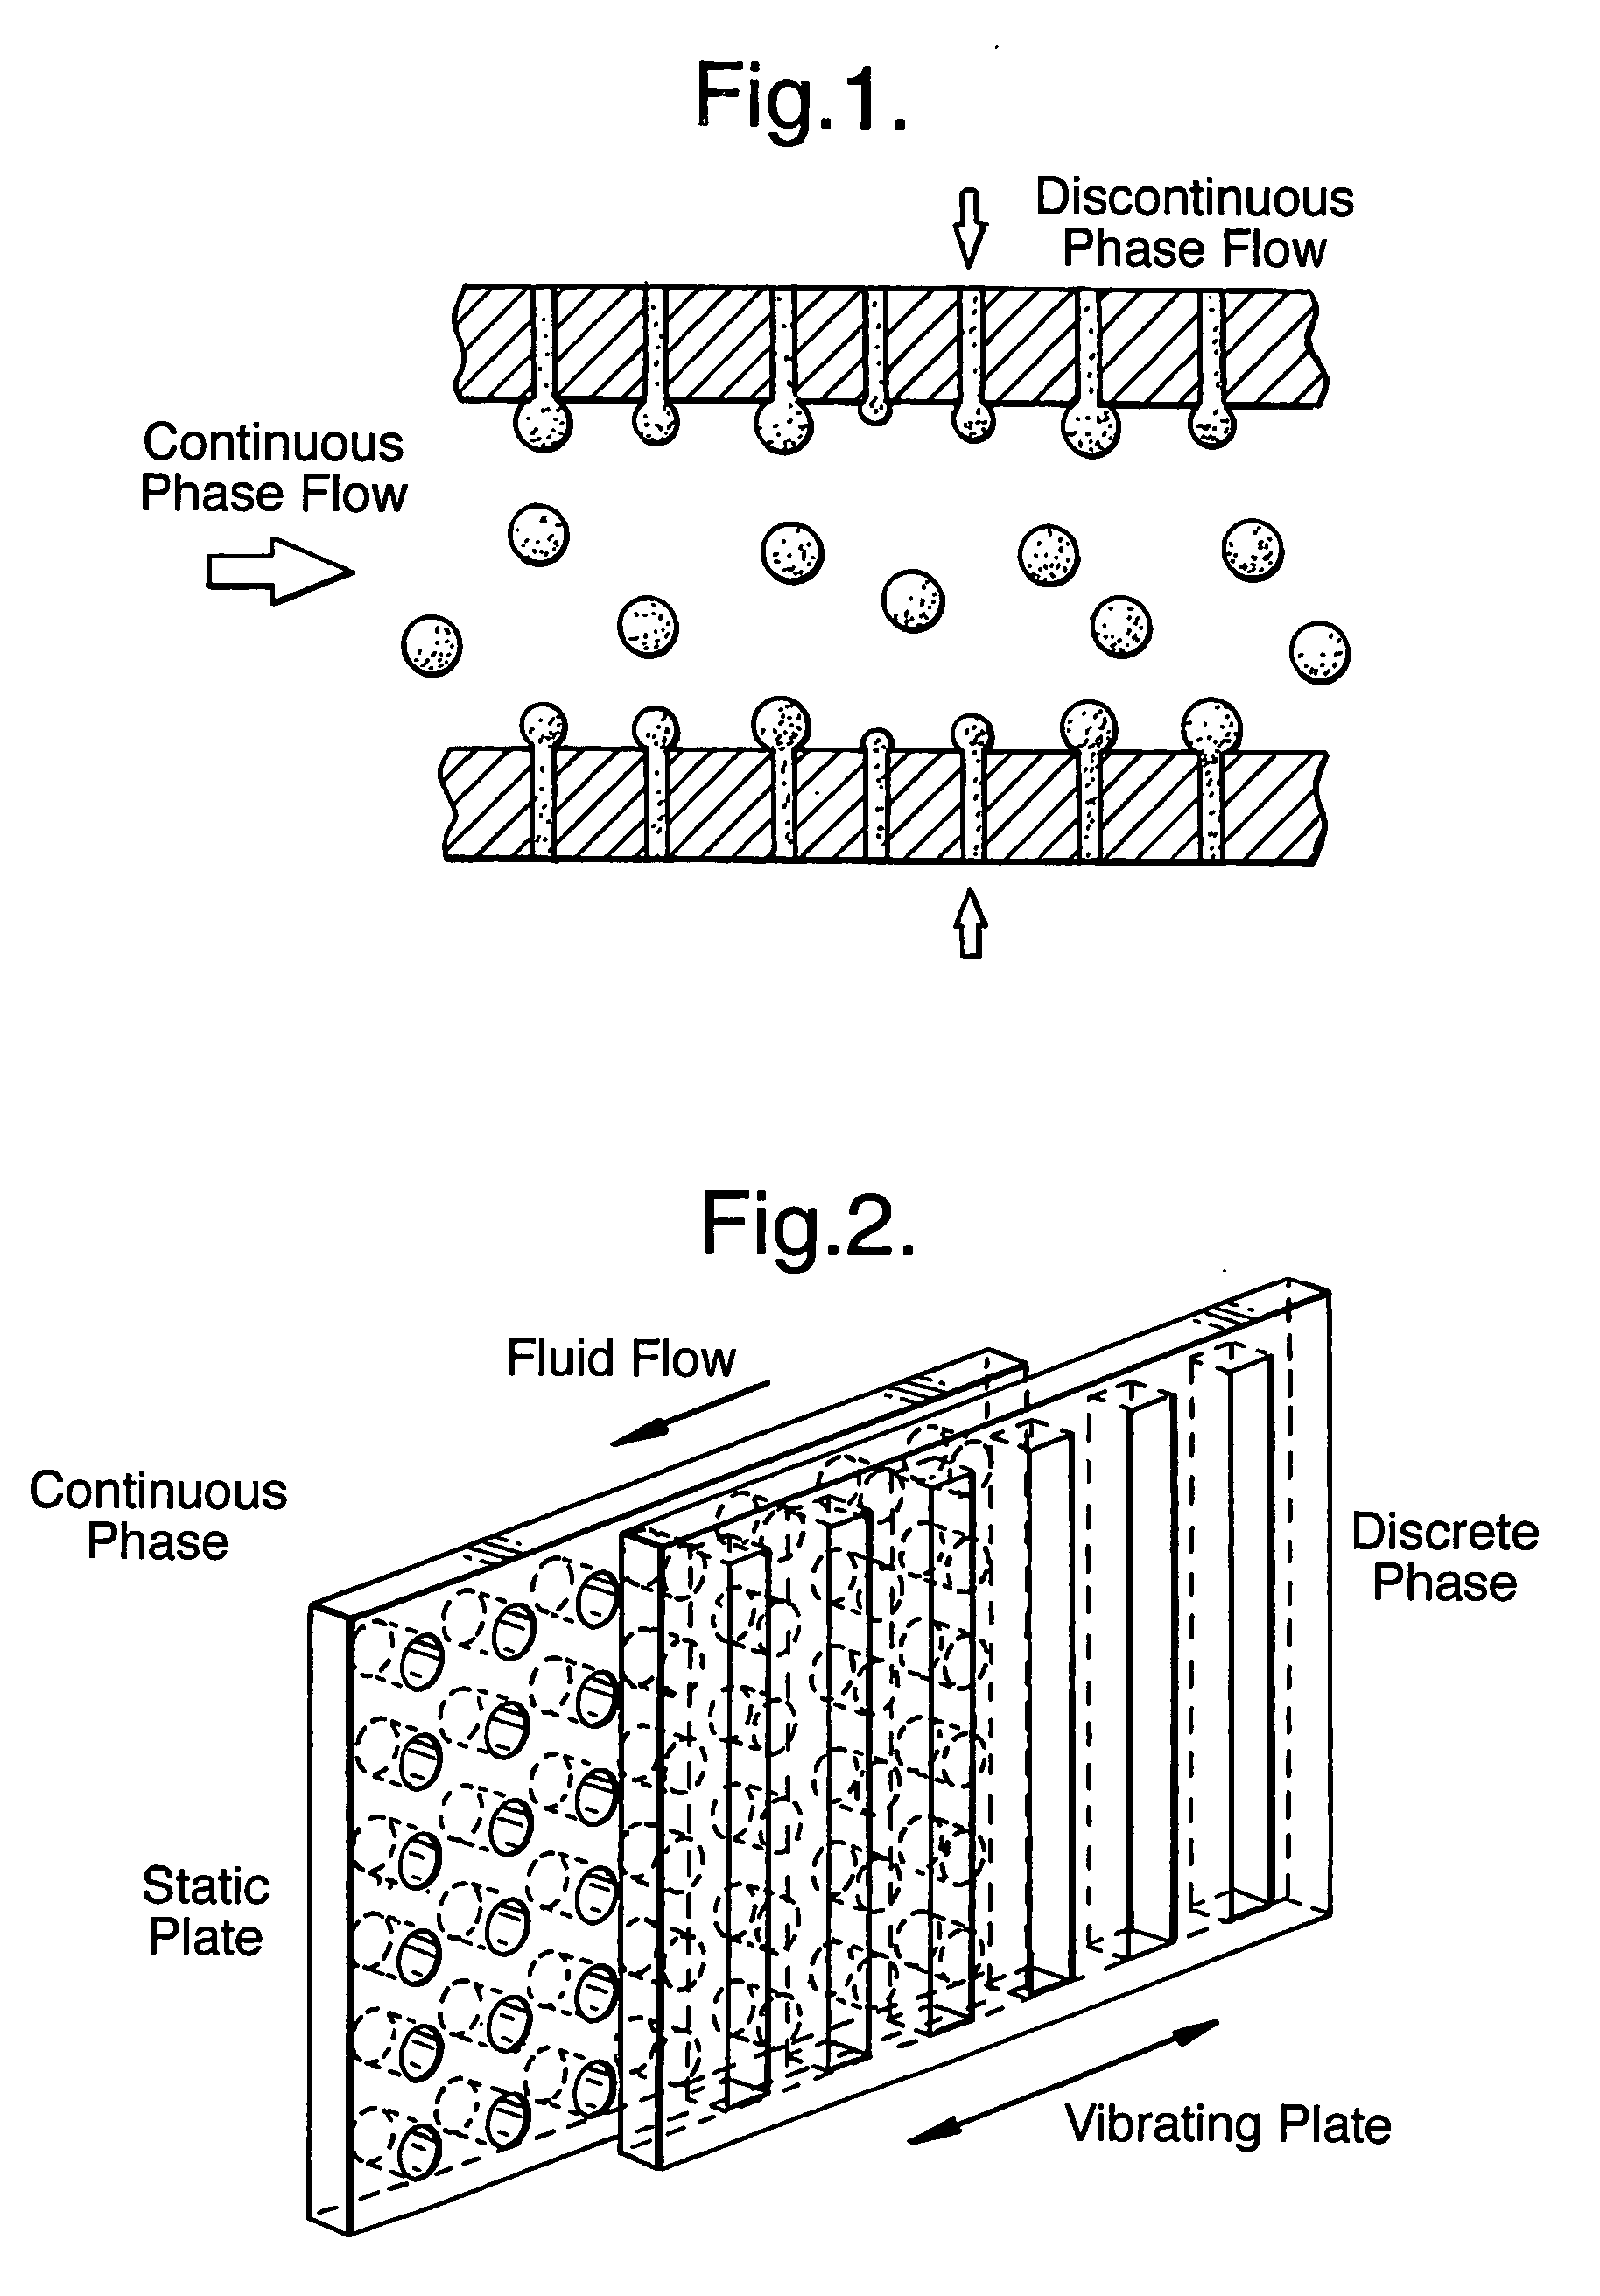 Method for controlling droplet size of an emulsion when mixing two immiscible fluids